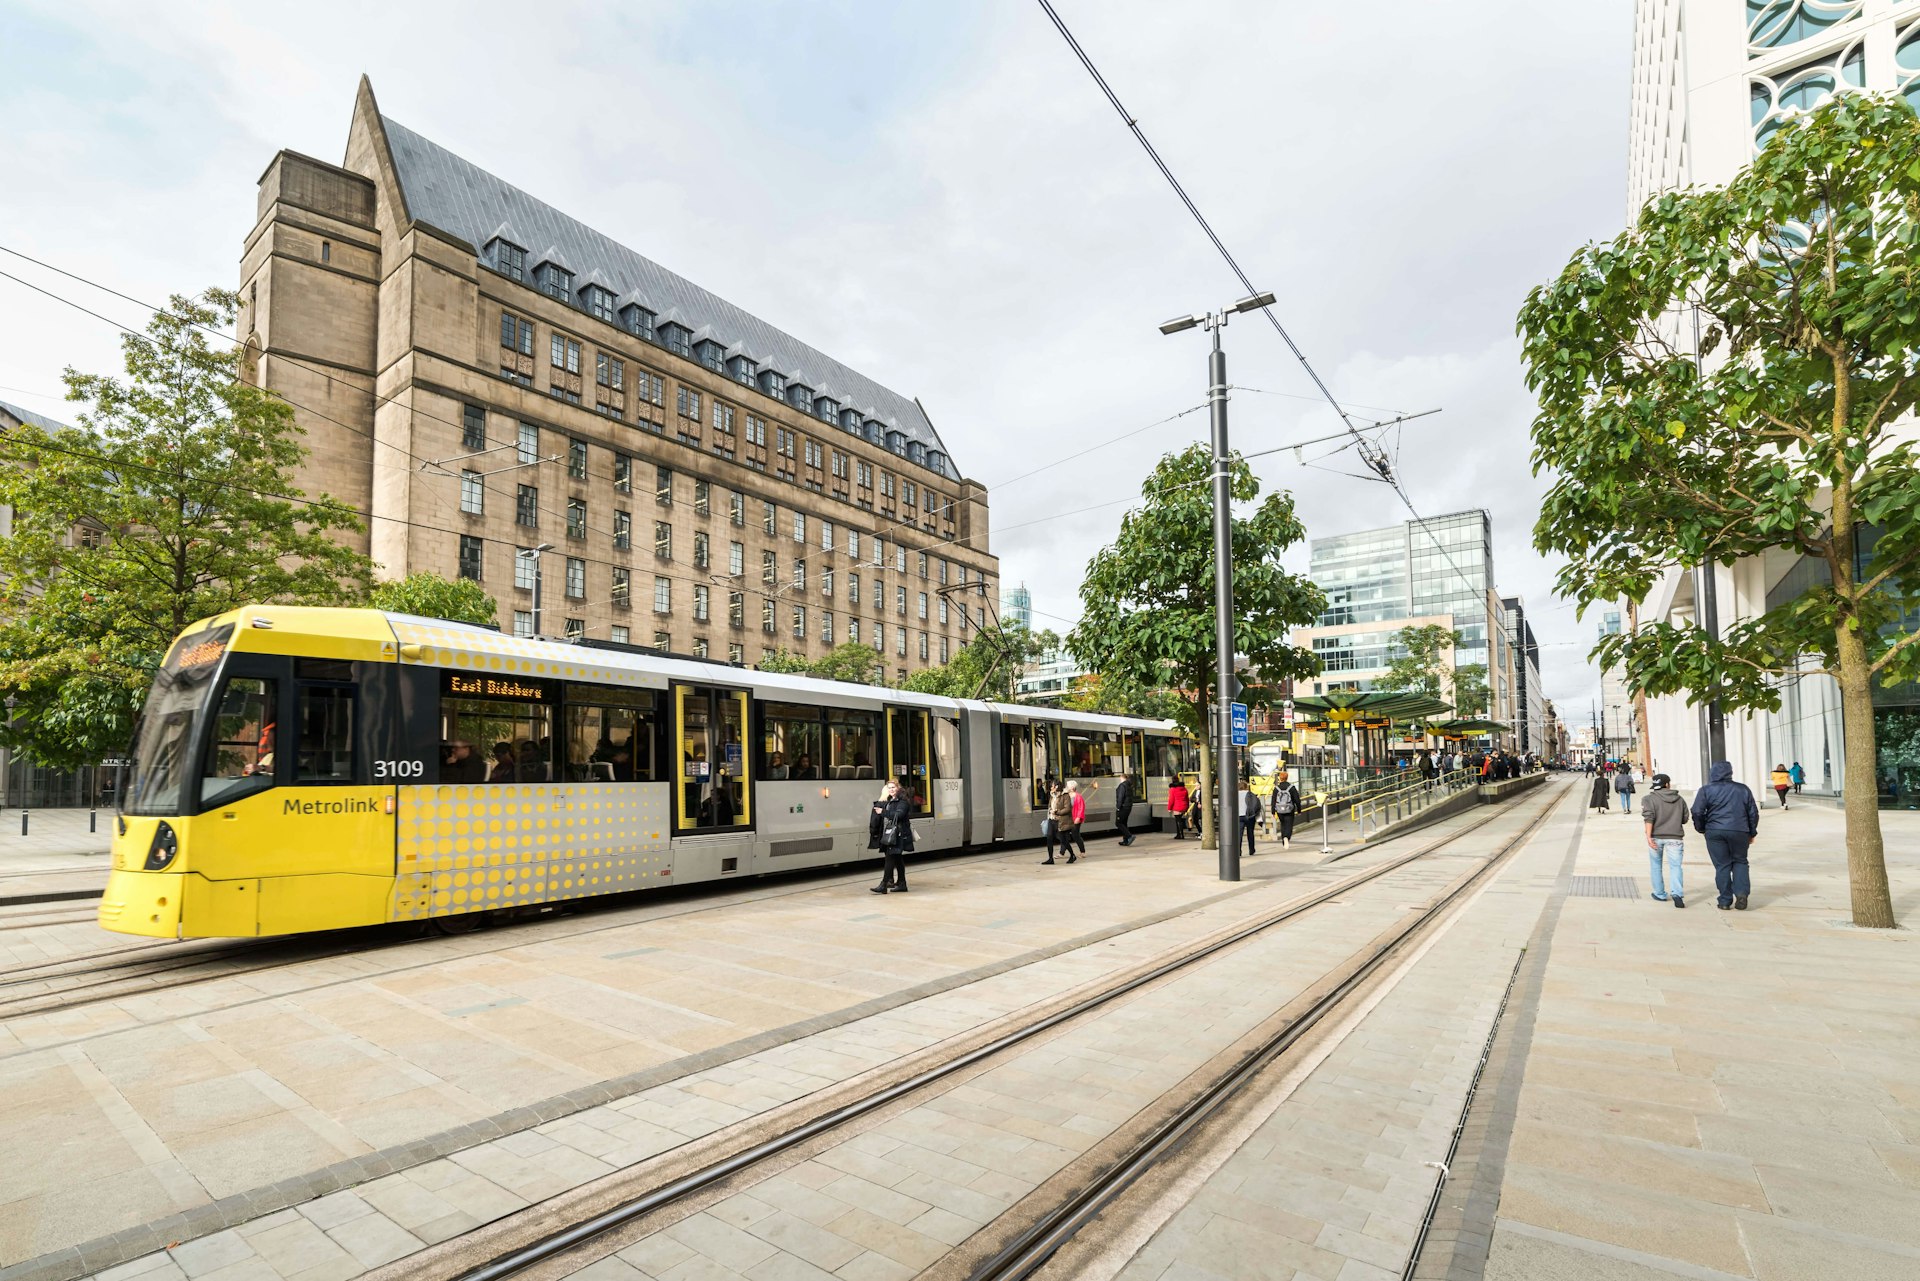 People walking to and alongside the Metrolink tram at St Peter's Square, Manchester